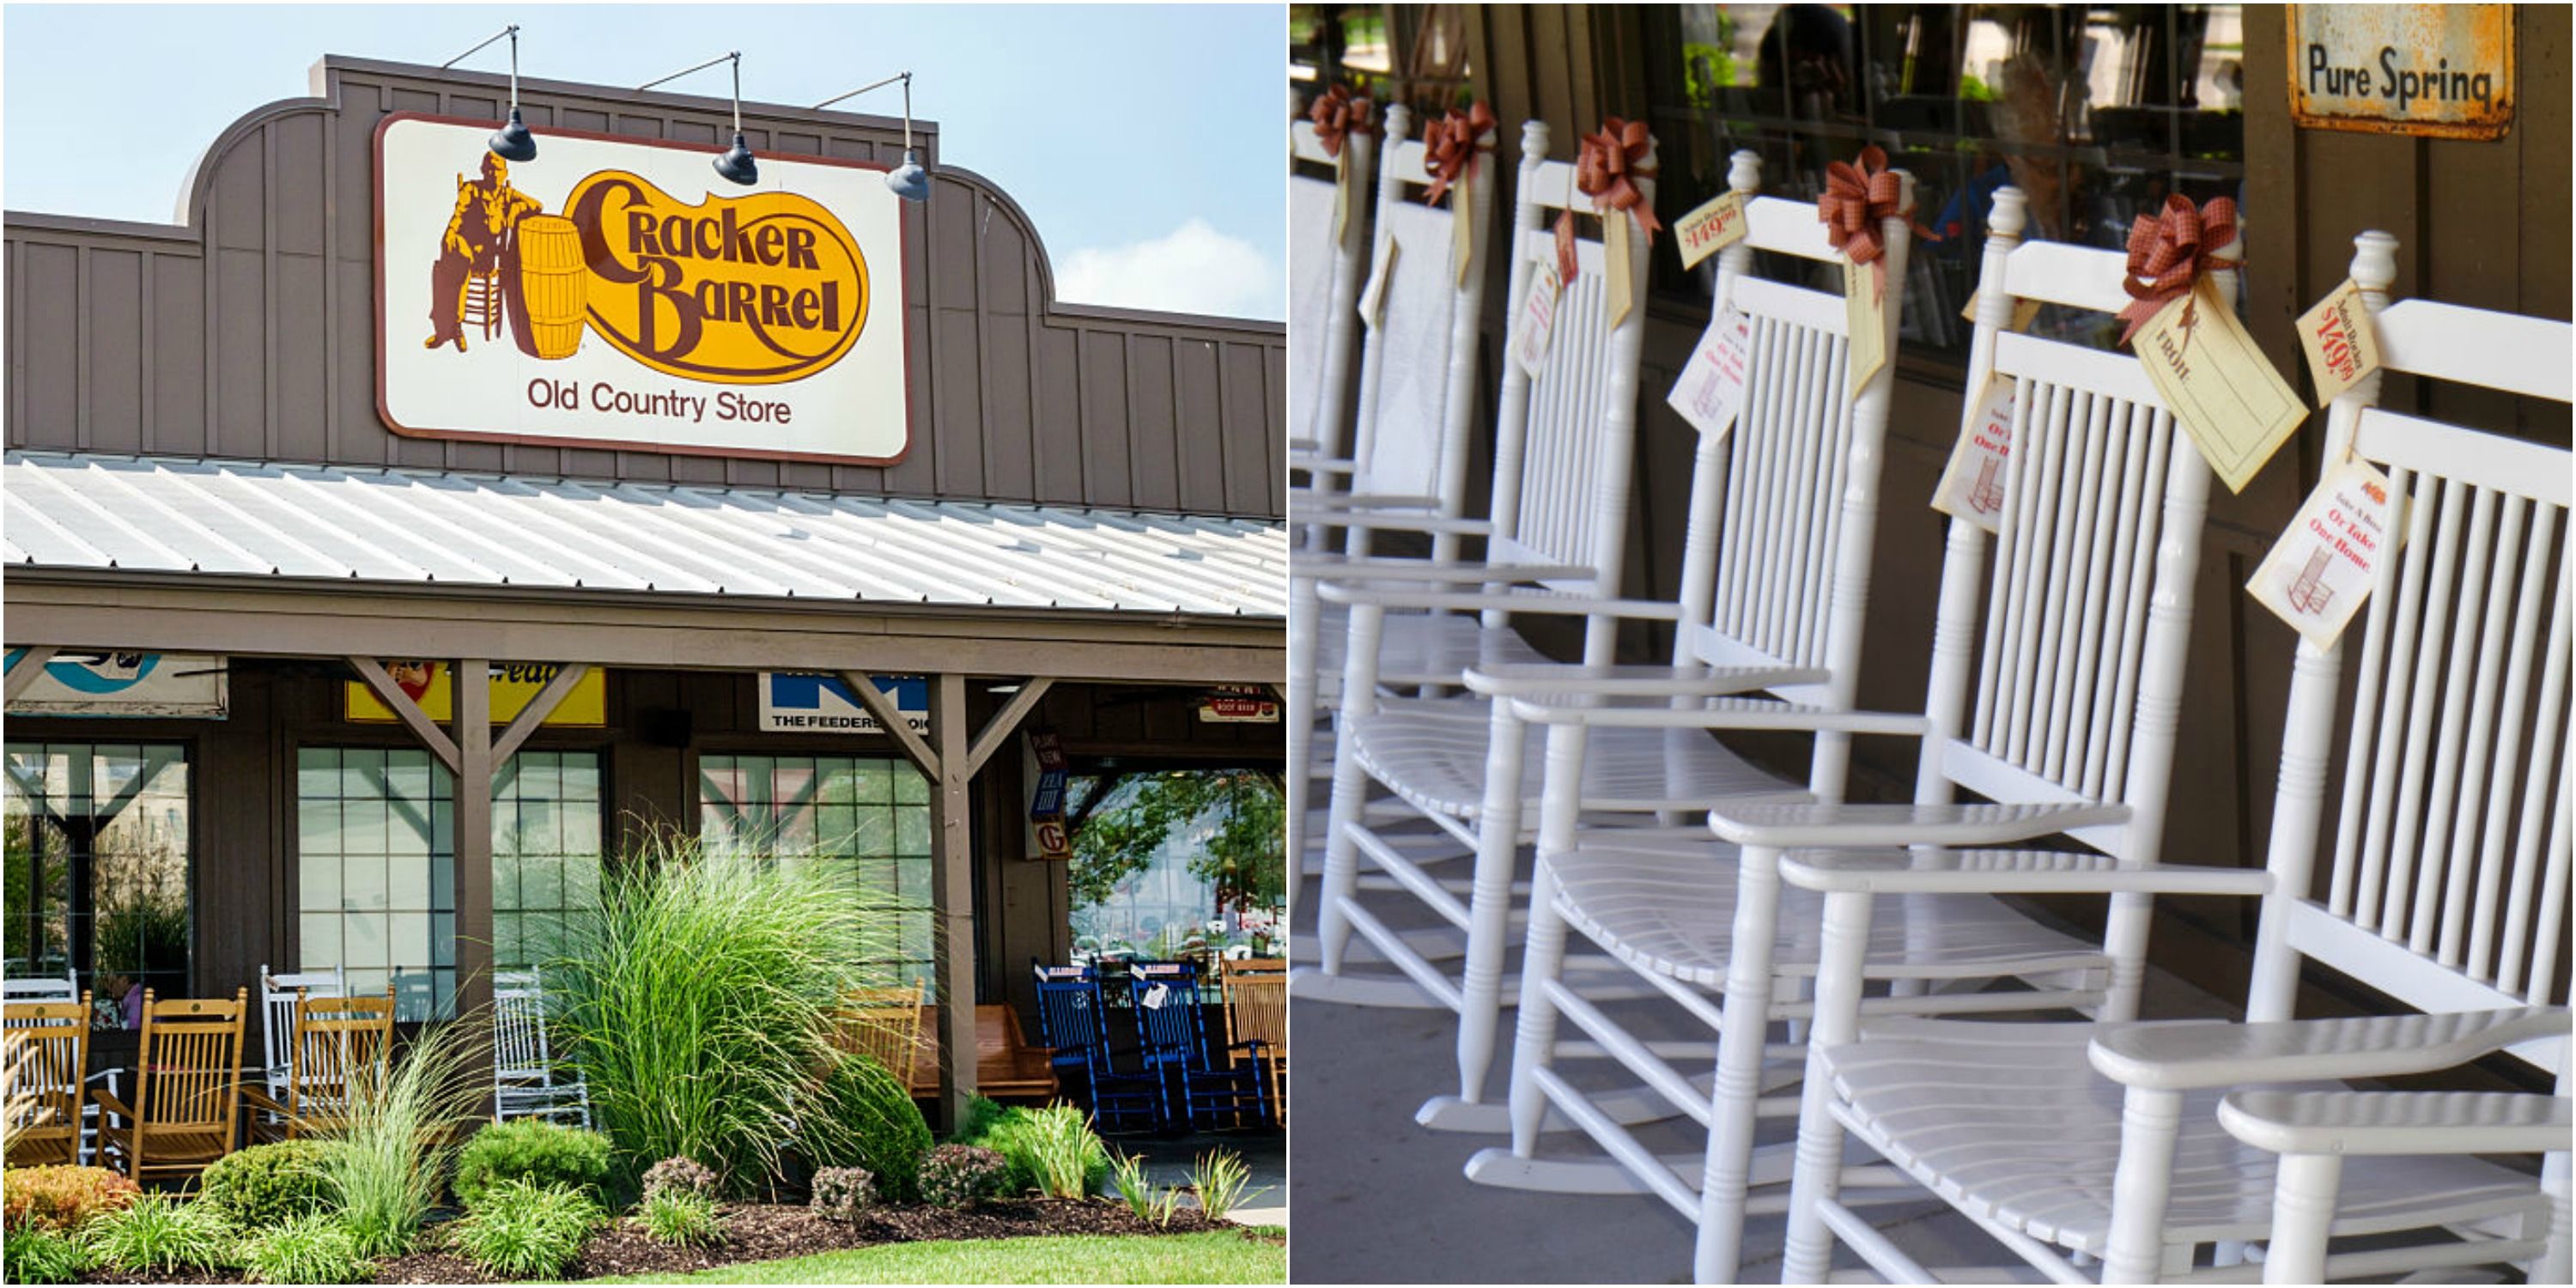 cracker barrel gave away 100 free rockers to expectant